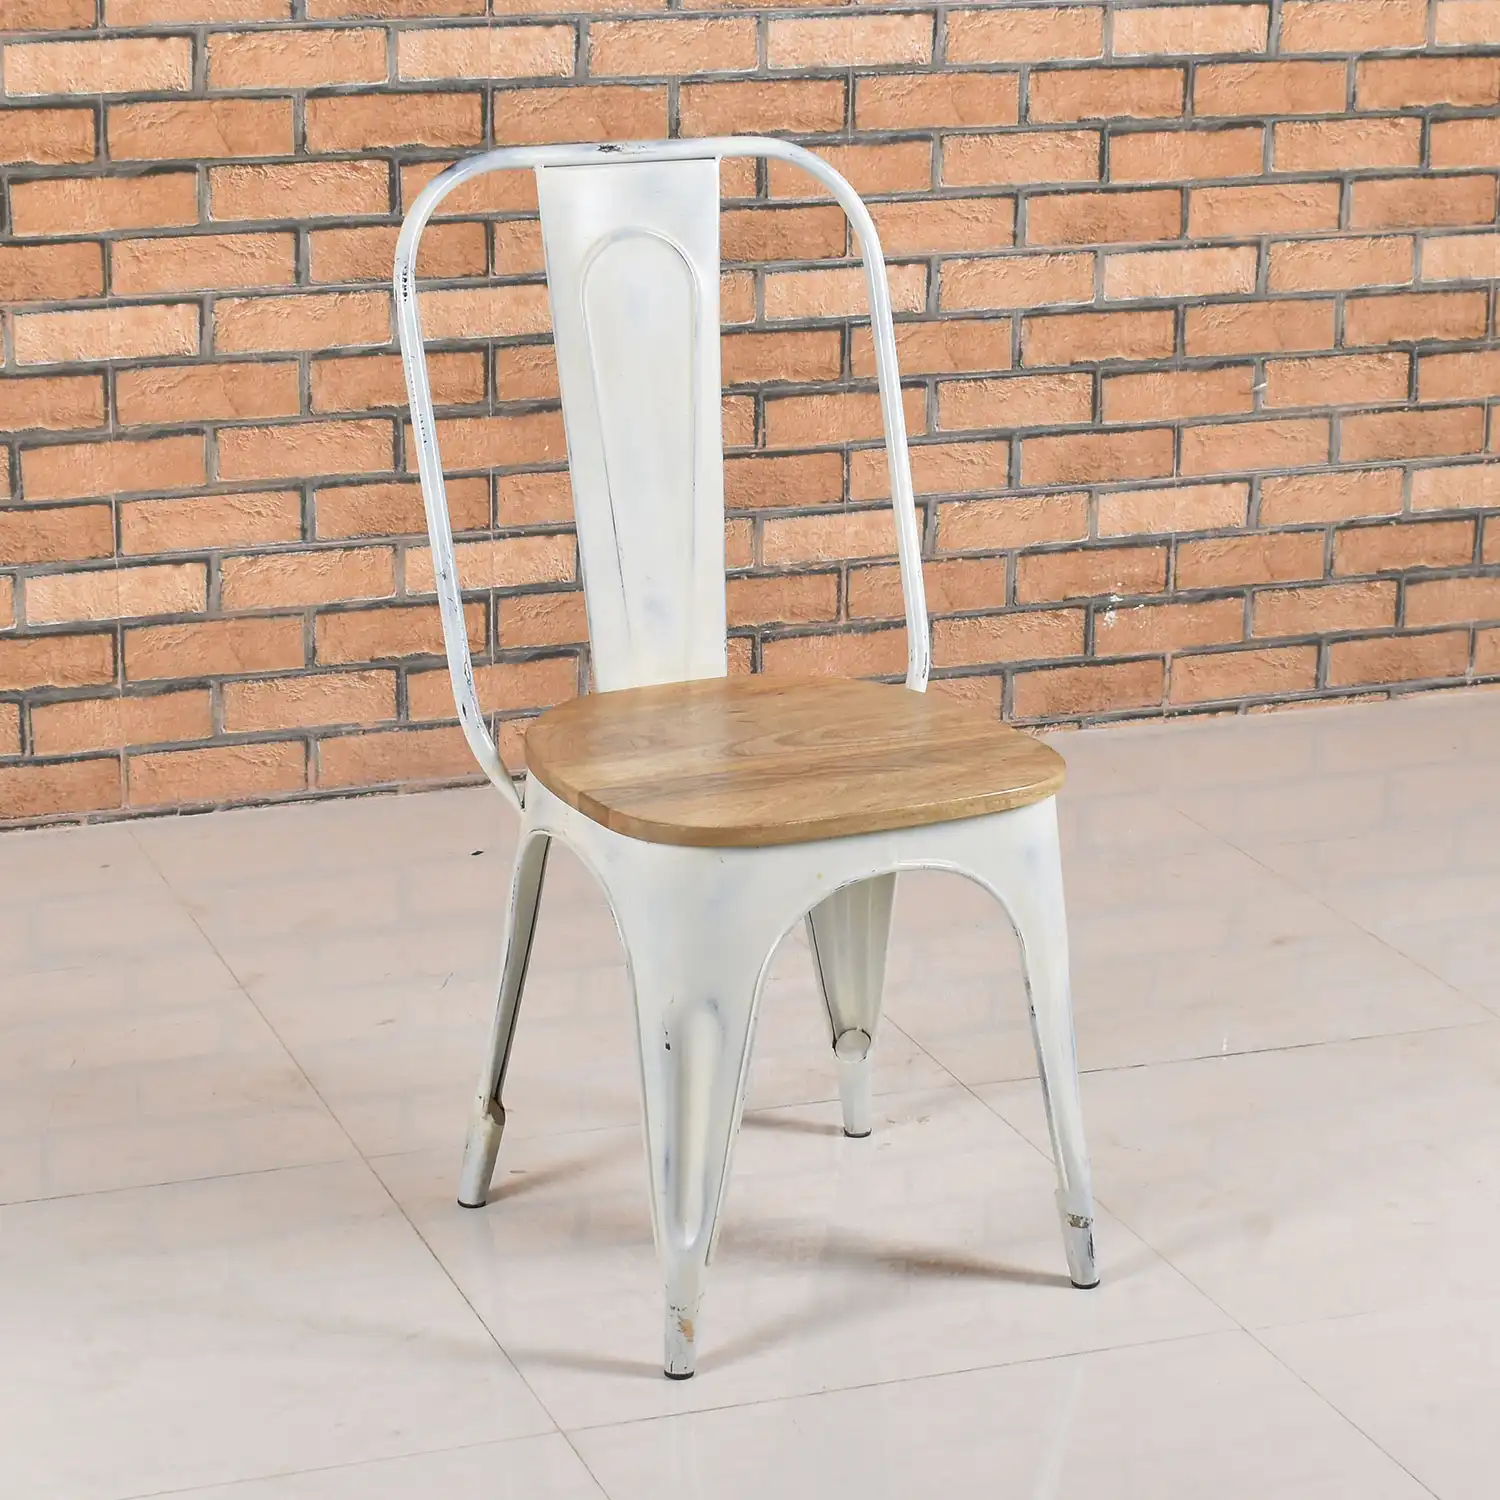 Industrial Iron Cello Chair with Wooden Seat - popular handicrafts